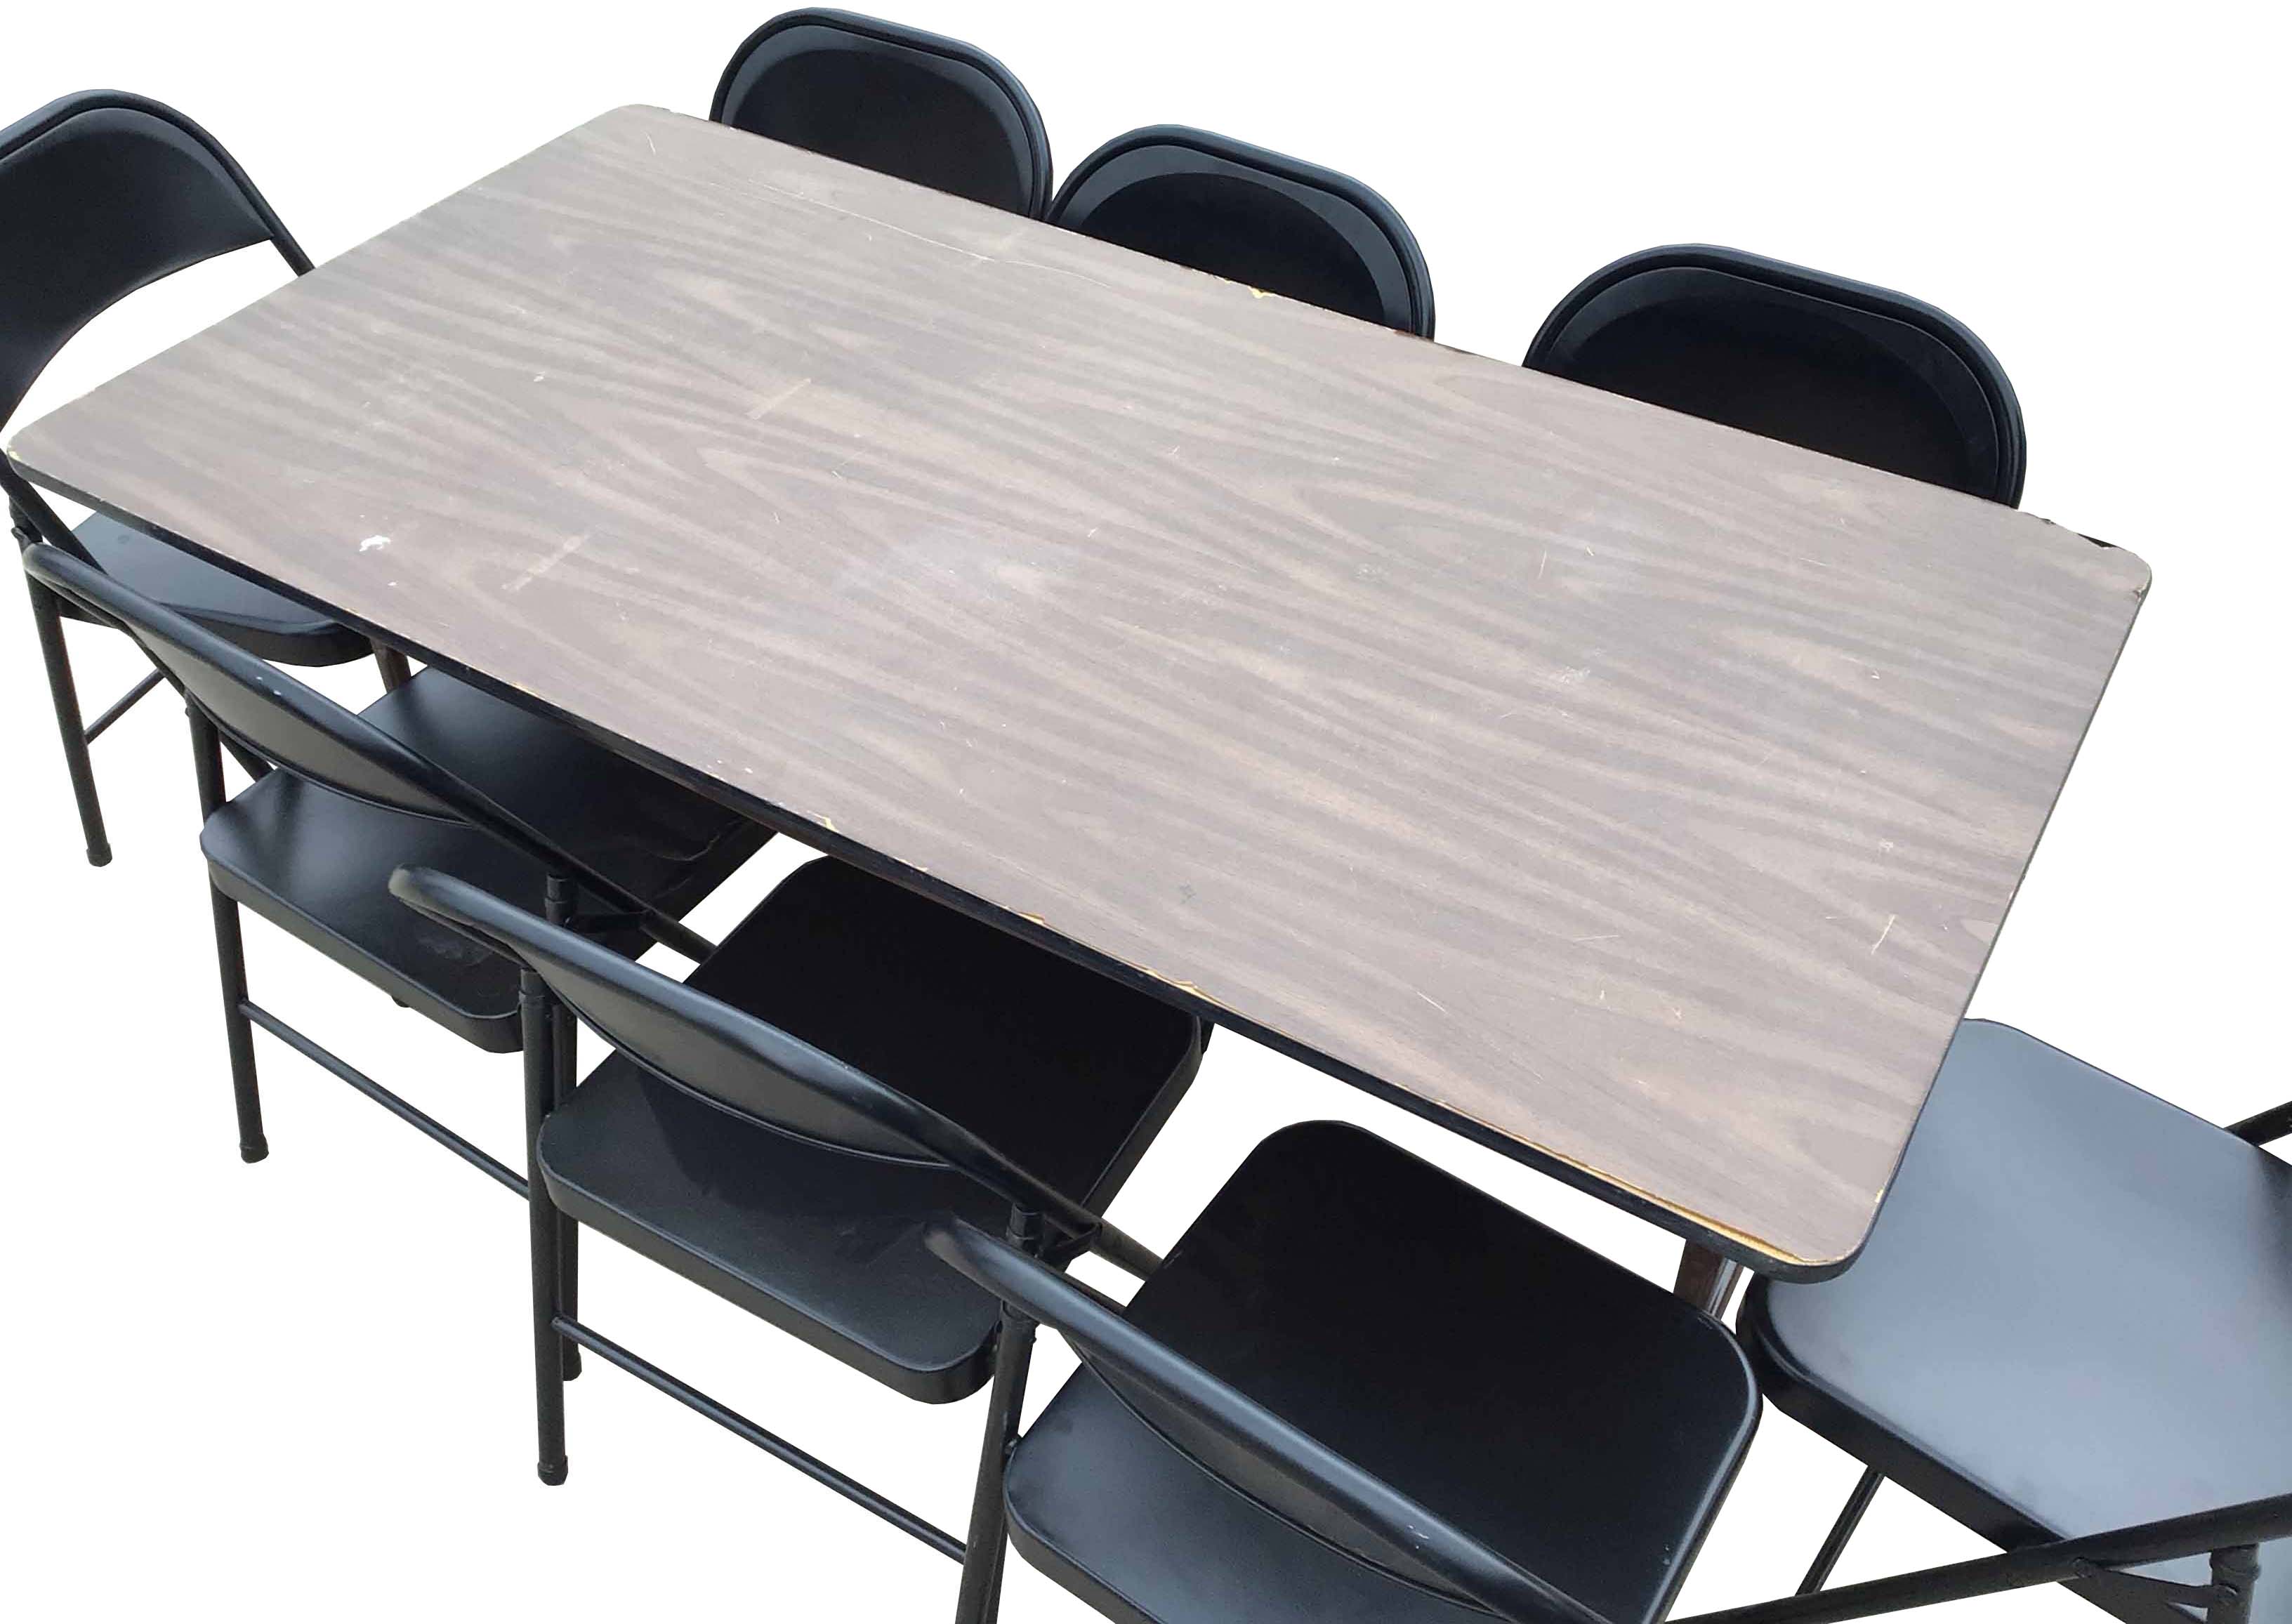 5 foot non-bifold rectangle tables